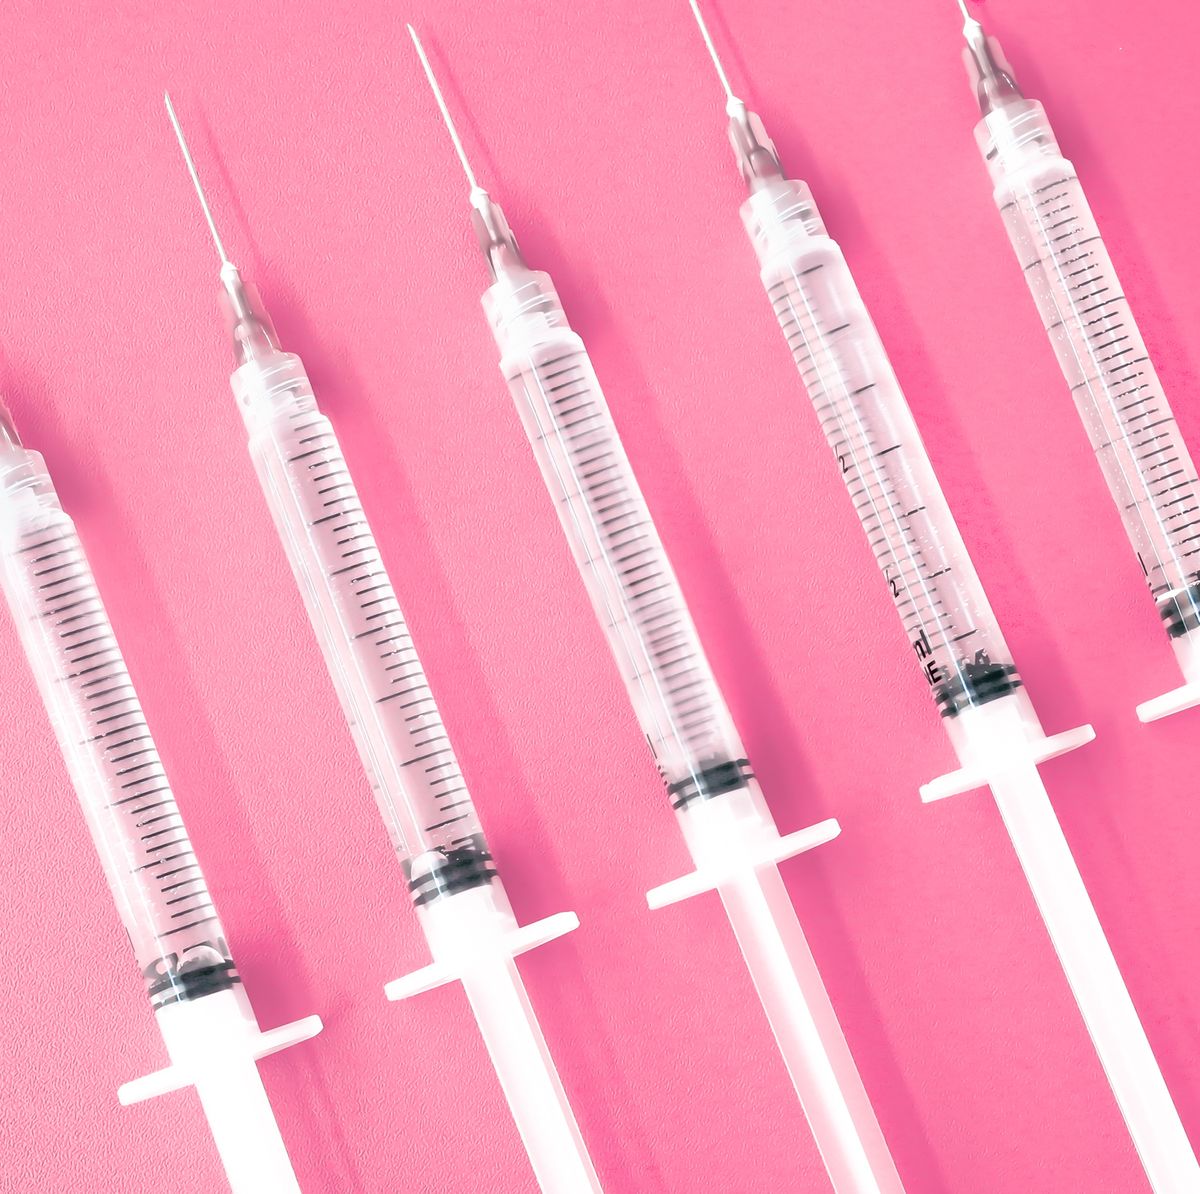 multiple syringes with needles on pink background